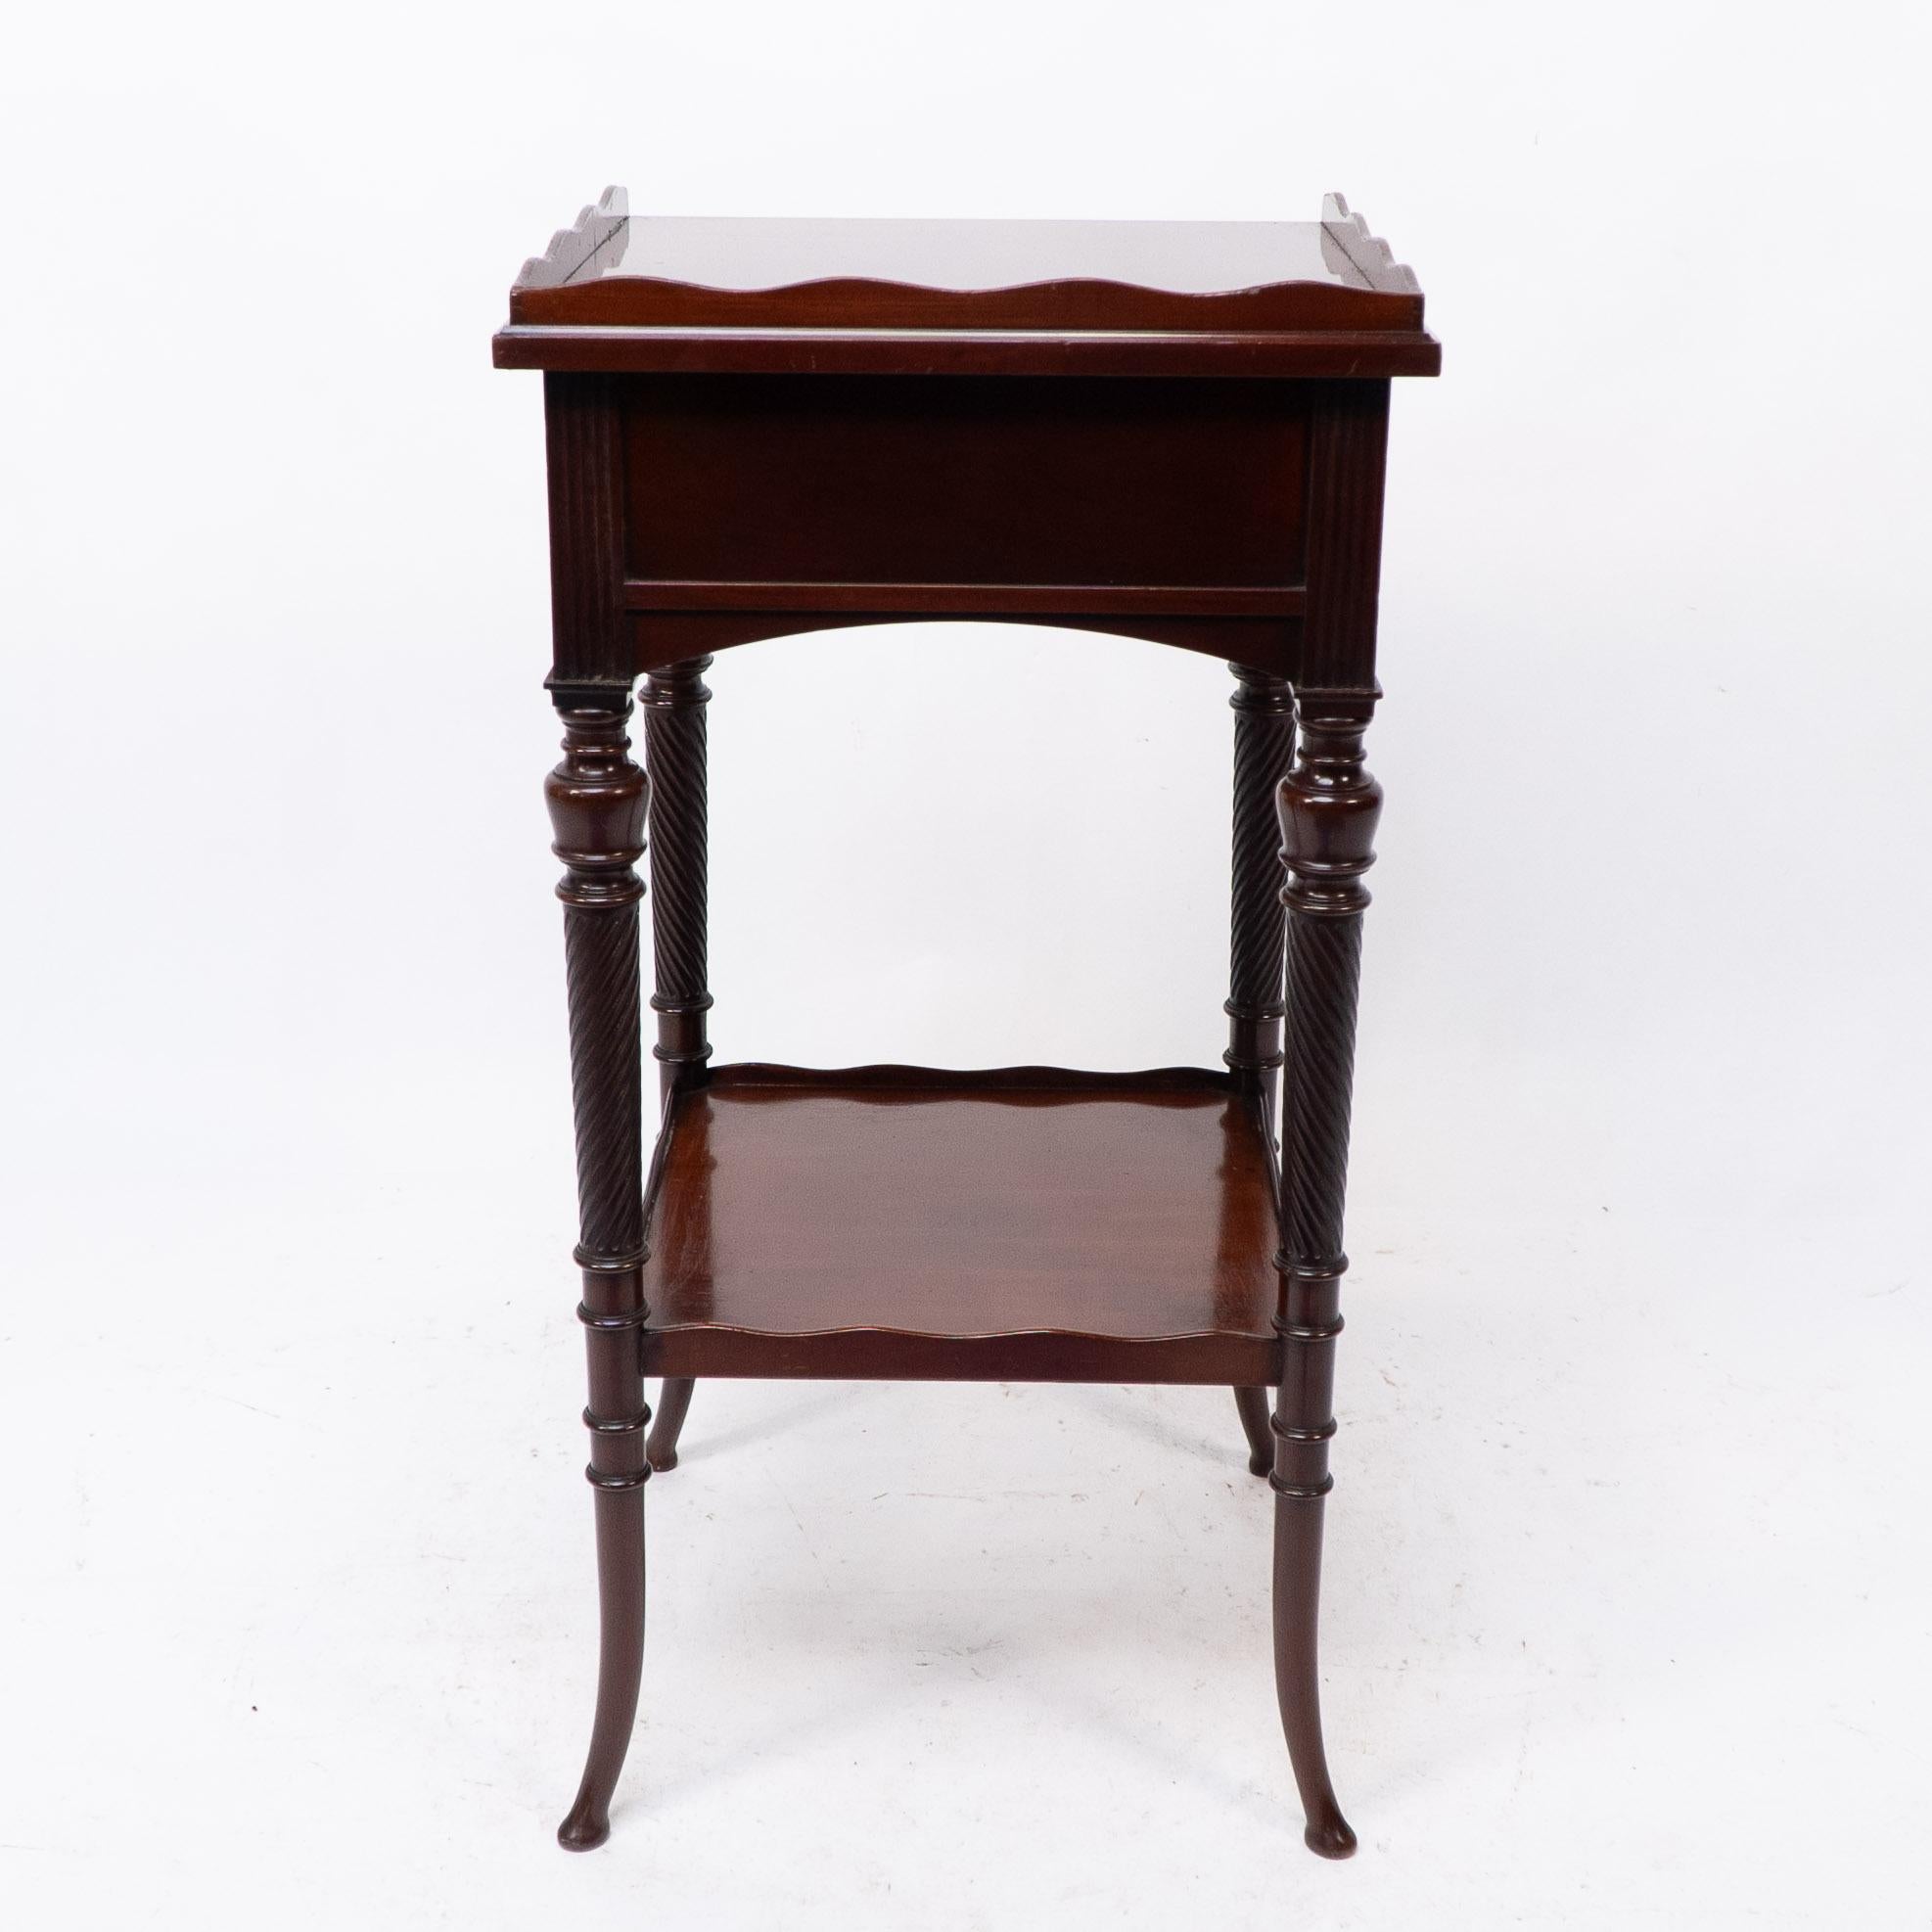 E W Godwin attr, for Collinson & Lock. An Aesthetic Movement mahogany side table For Sale 14